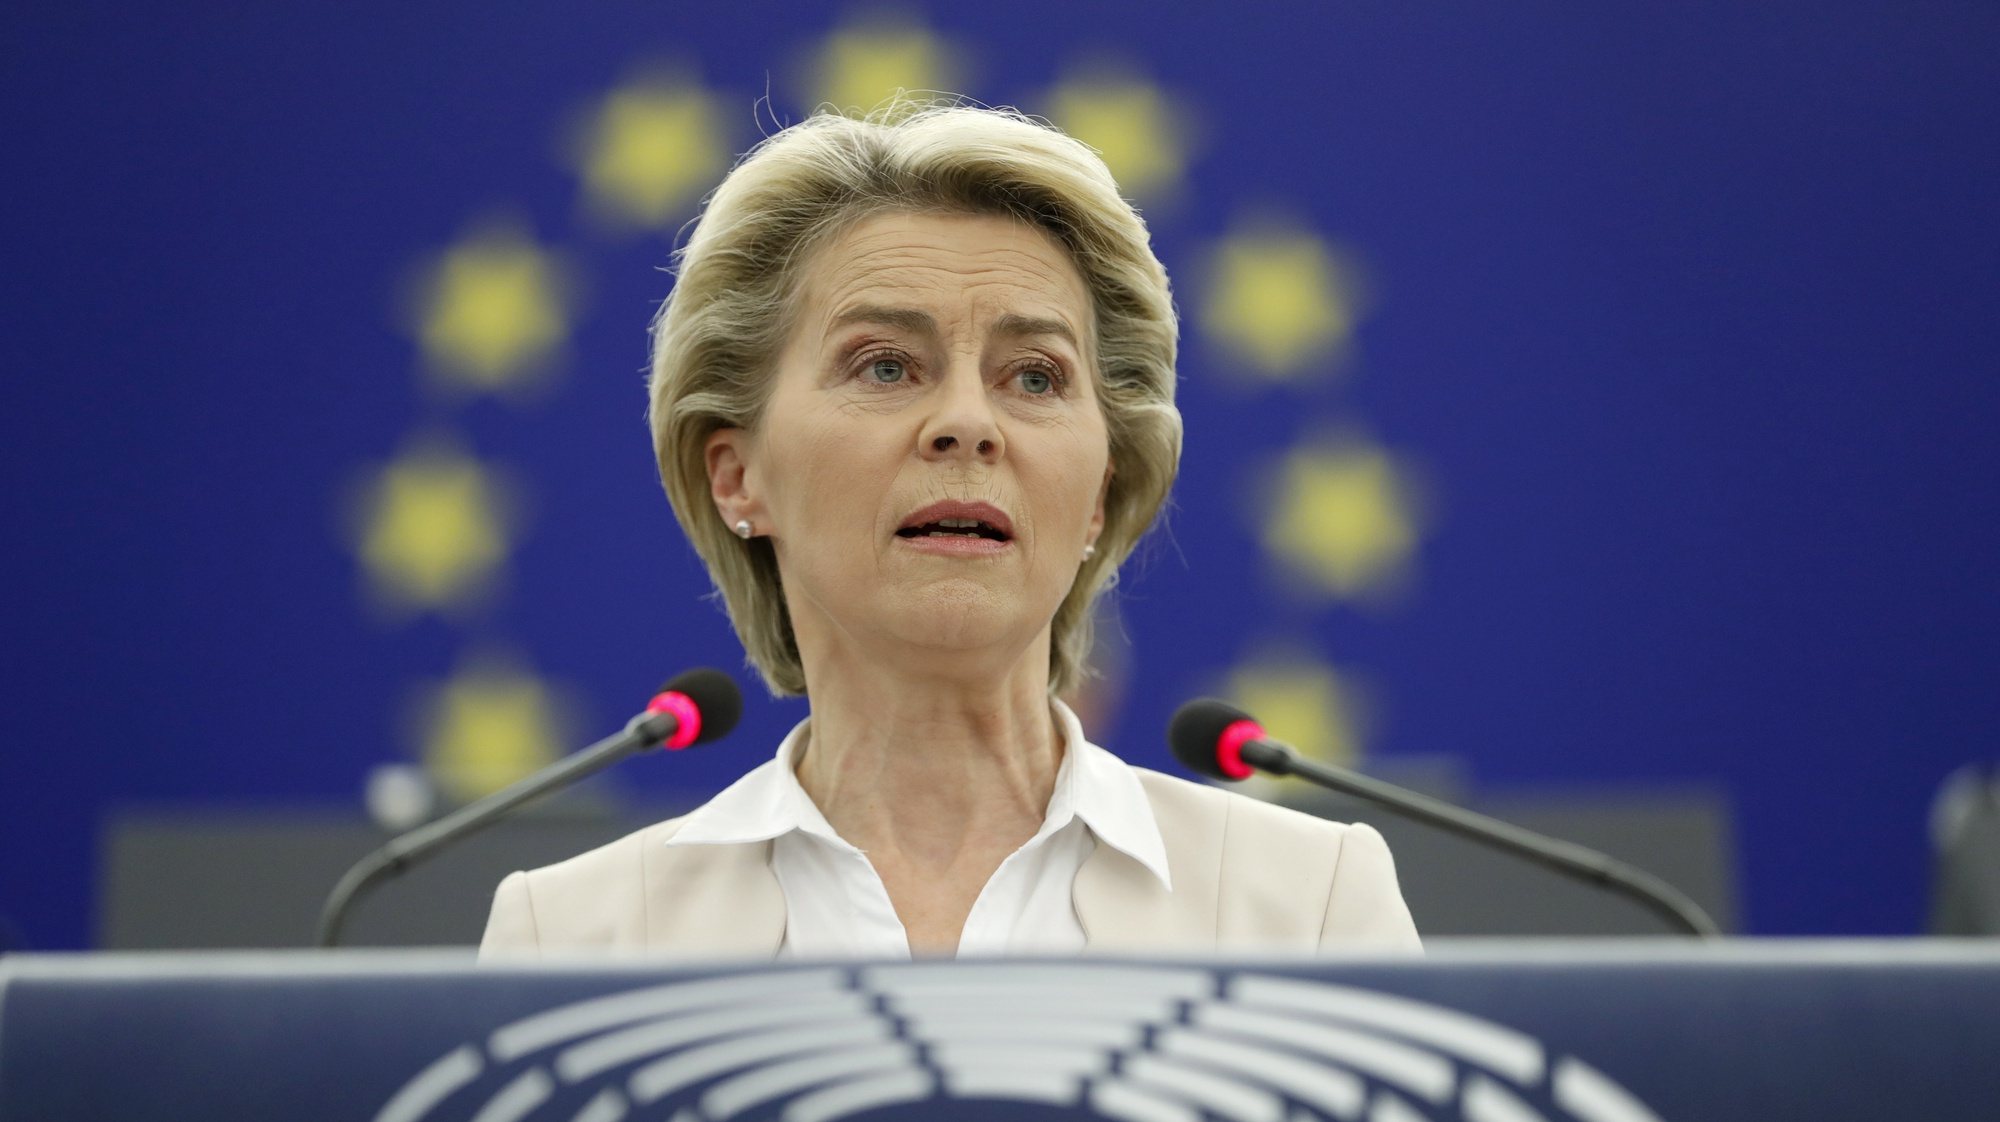 epa09254580 European Commission President Ursula von der Leyen speaks at the European Parliament in Strasbourg, eastern France, 08 June 2021. The European Parliament&#039;s headquarters opened for a plenary session after being closed for 15 months due to the COVID-19 pandemic.  EPA/JEAN-FRANCOIS BADIAS / POOL